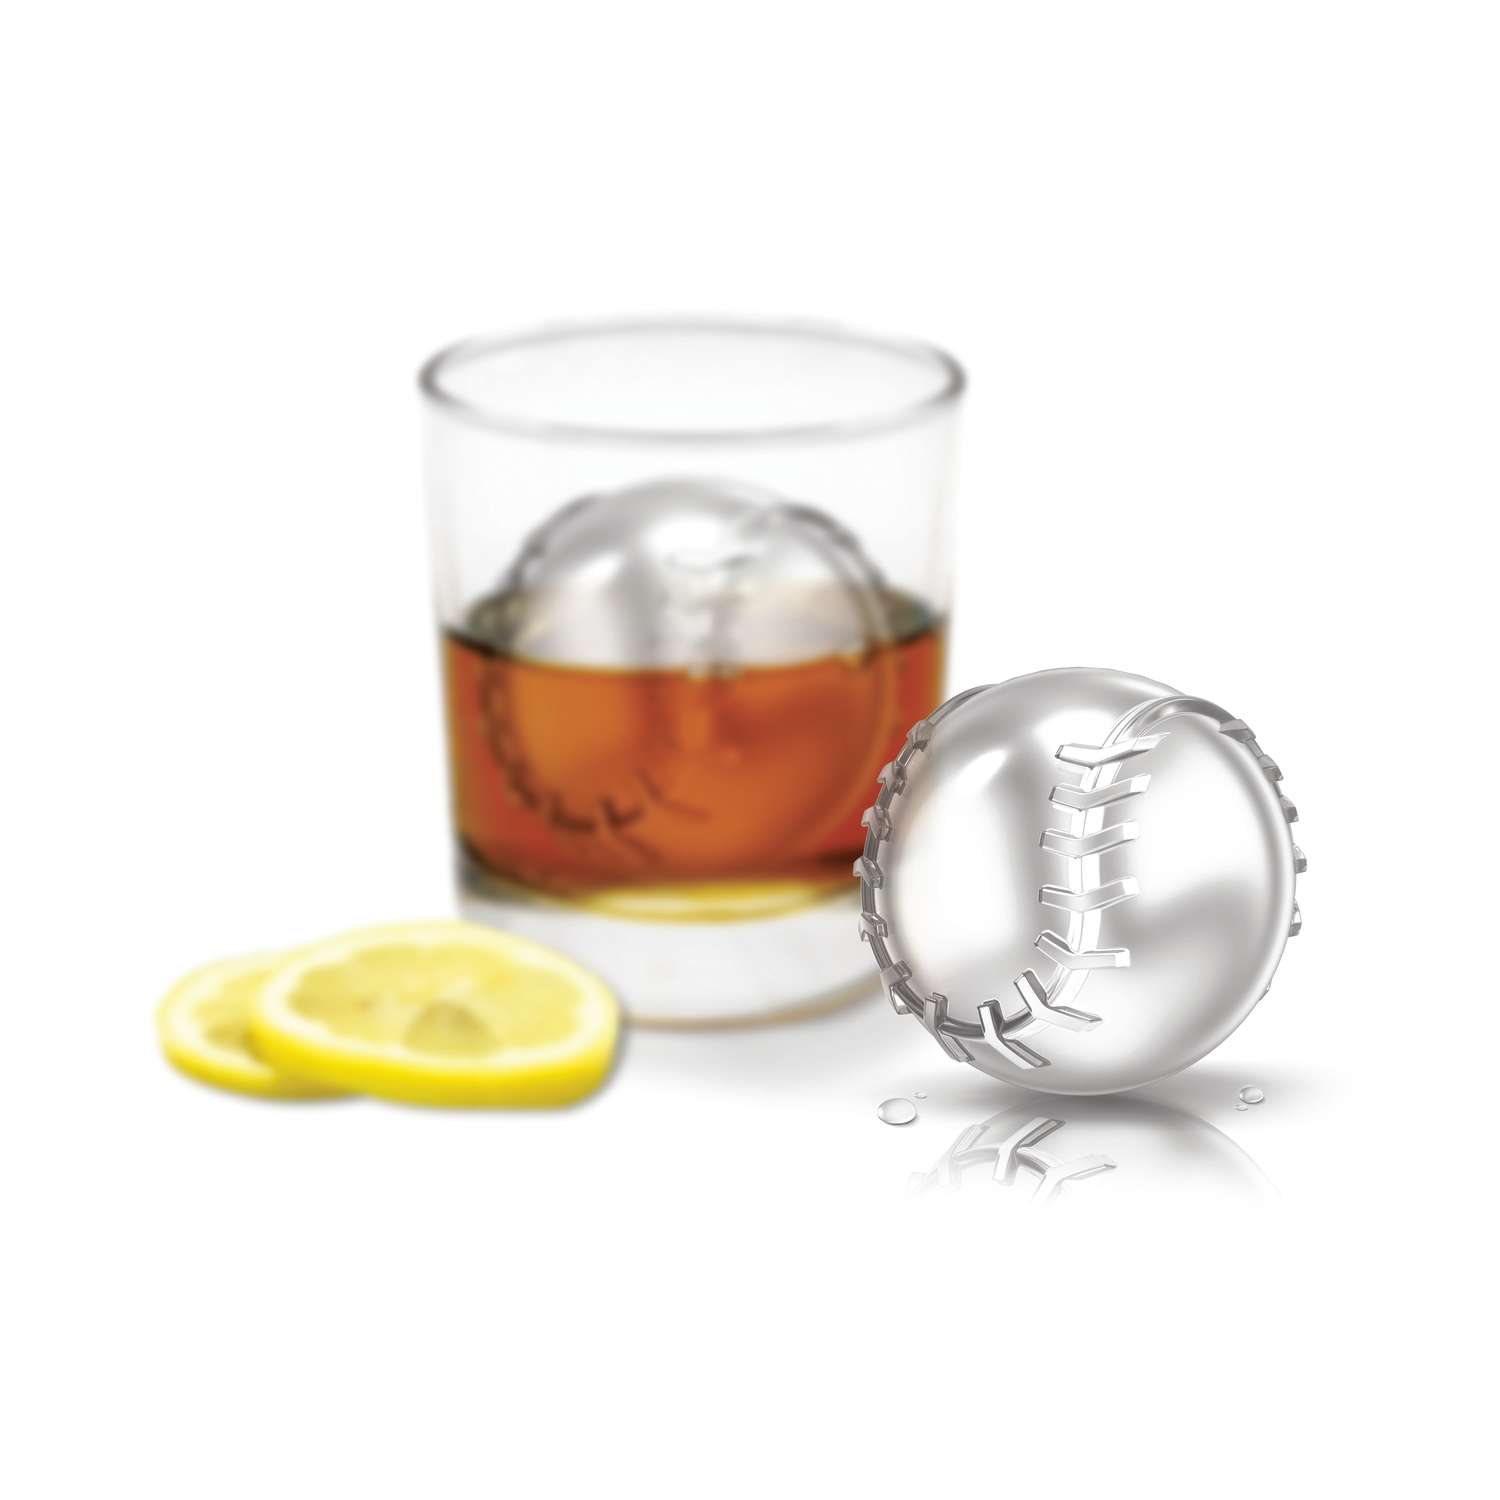 Tovolo Sphere Ice Molds - Set of 2 2.5, Soda & More